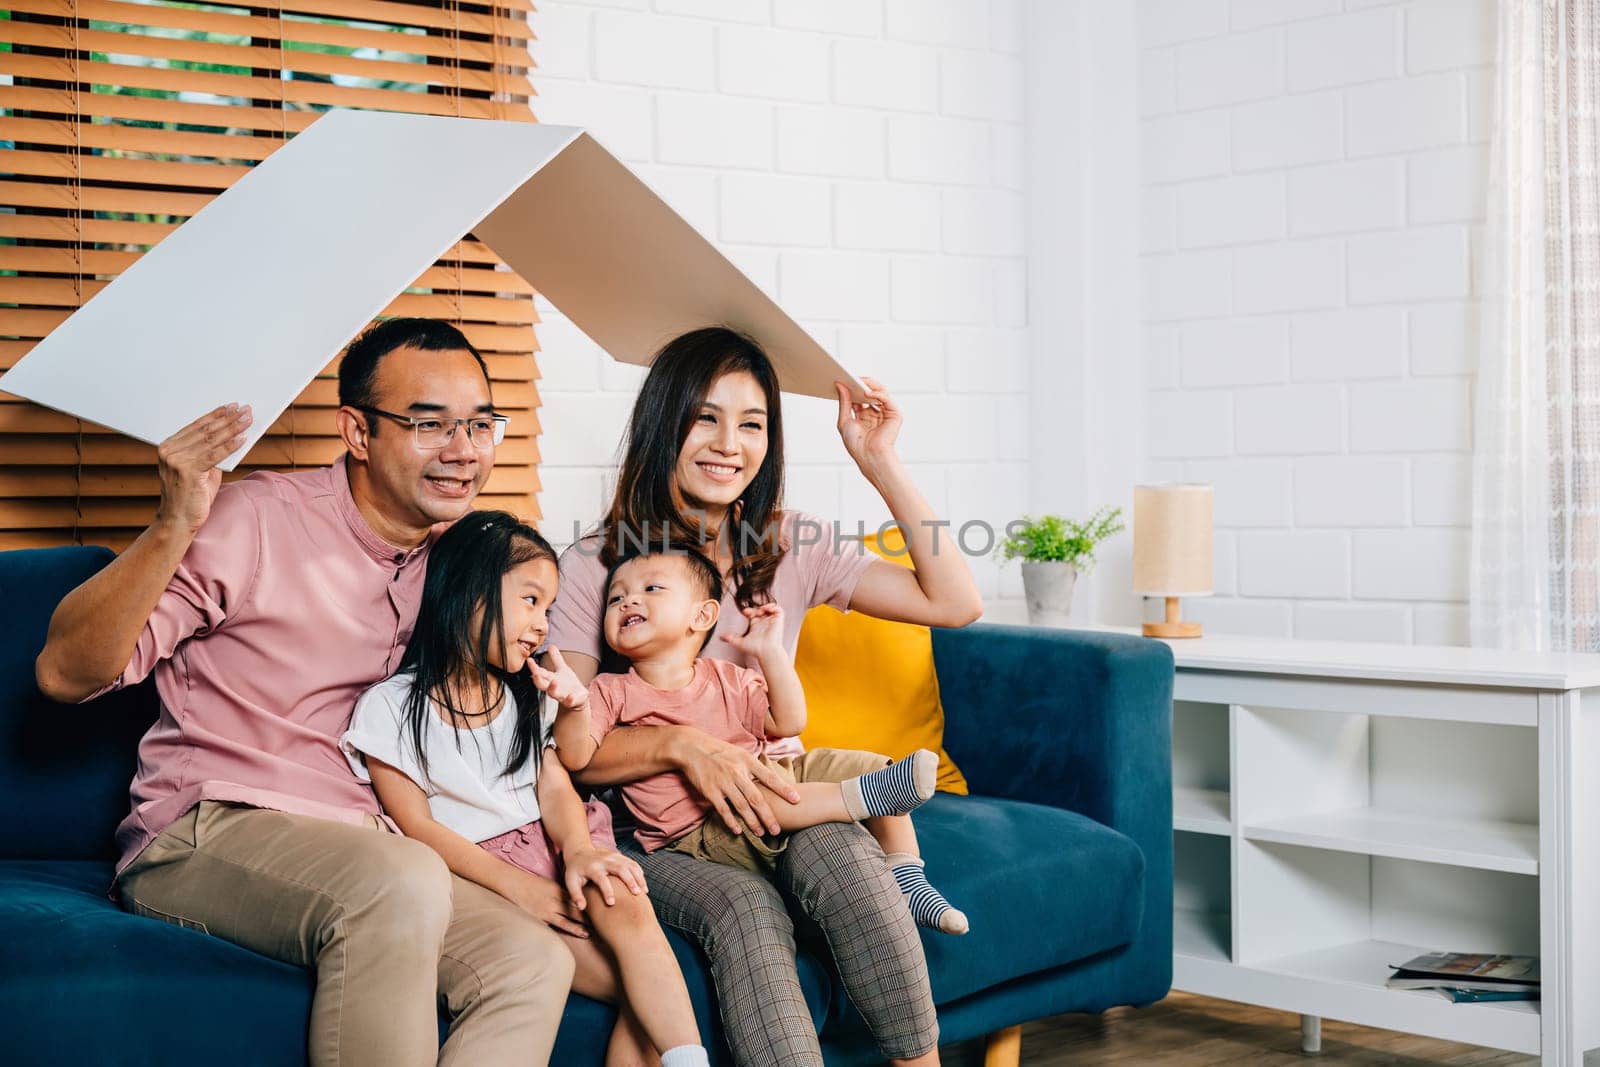 A joyful family during their home relocation sits on the sofa holding a cardboard roof mockup for protection. Safety happiness and planning for their new house is what makes them laugh.